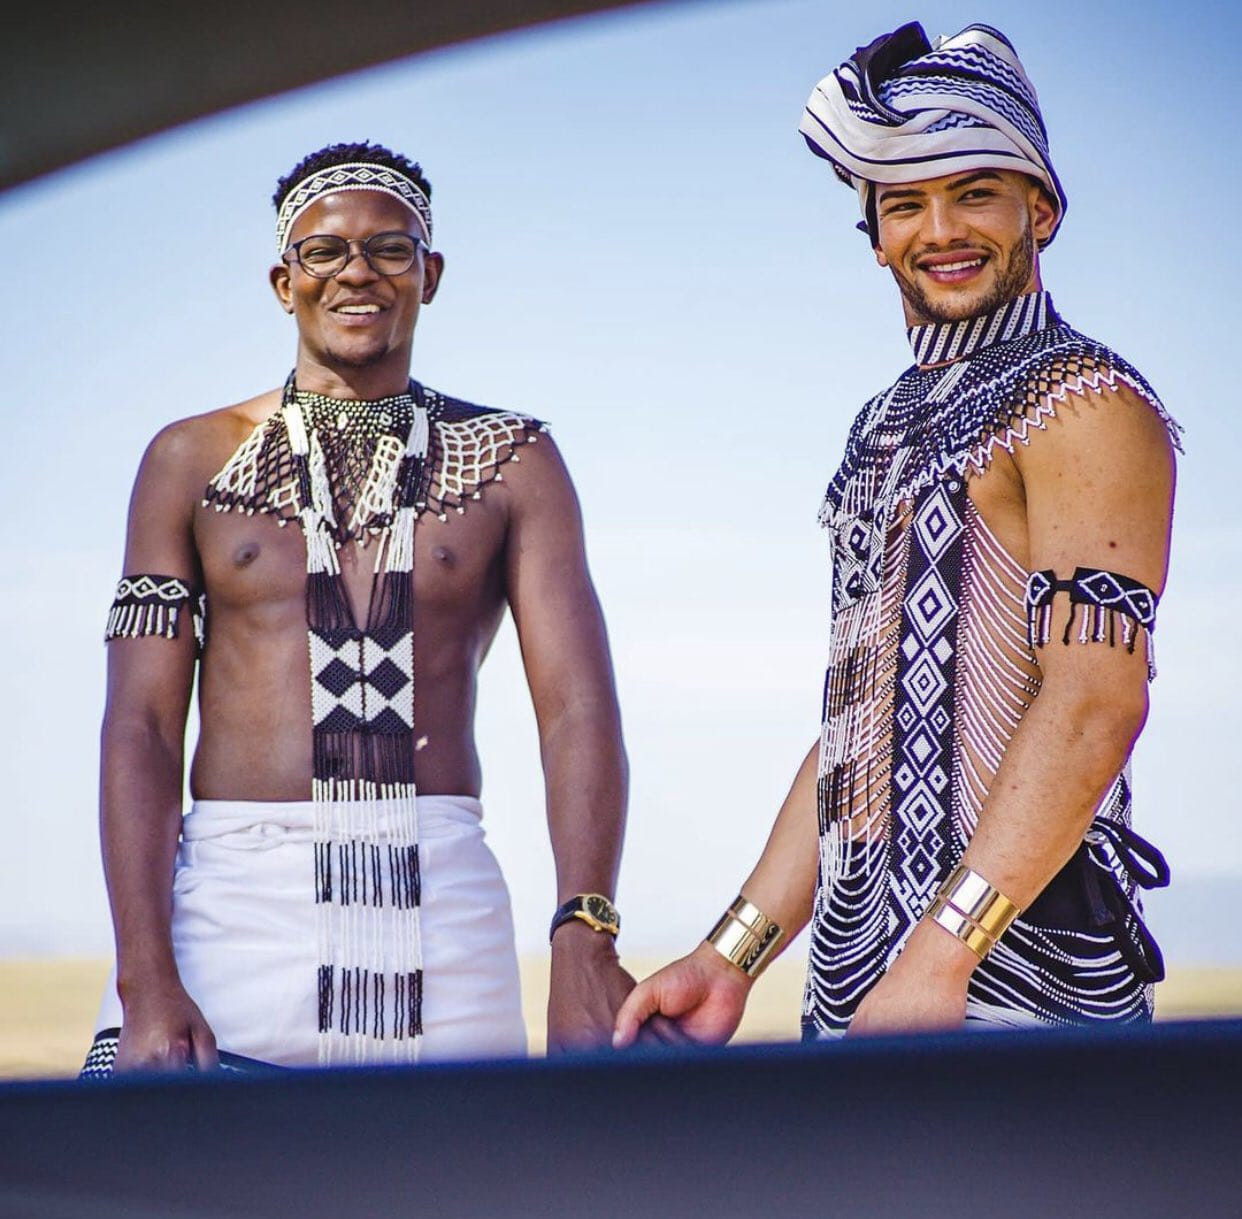 South African gay couple marry in traditional attire (photos)